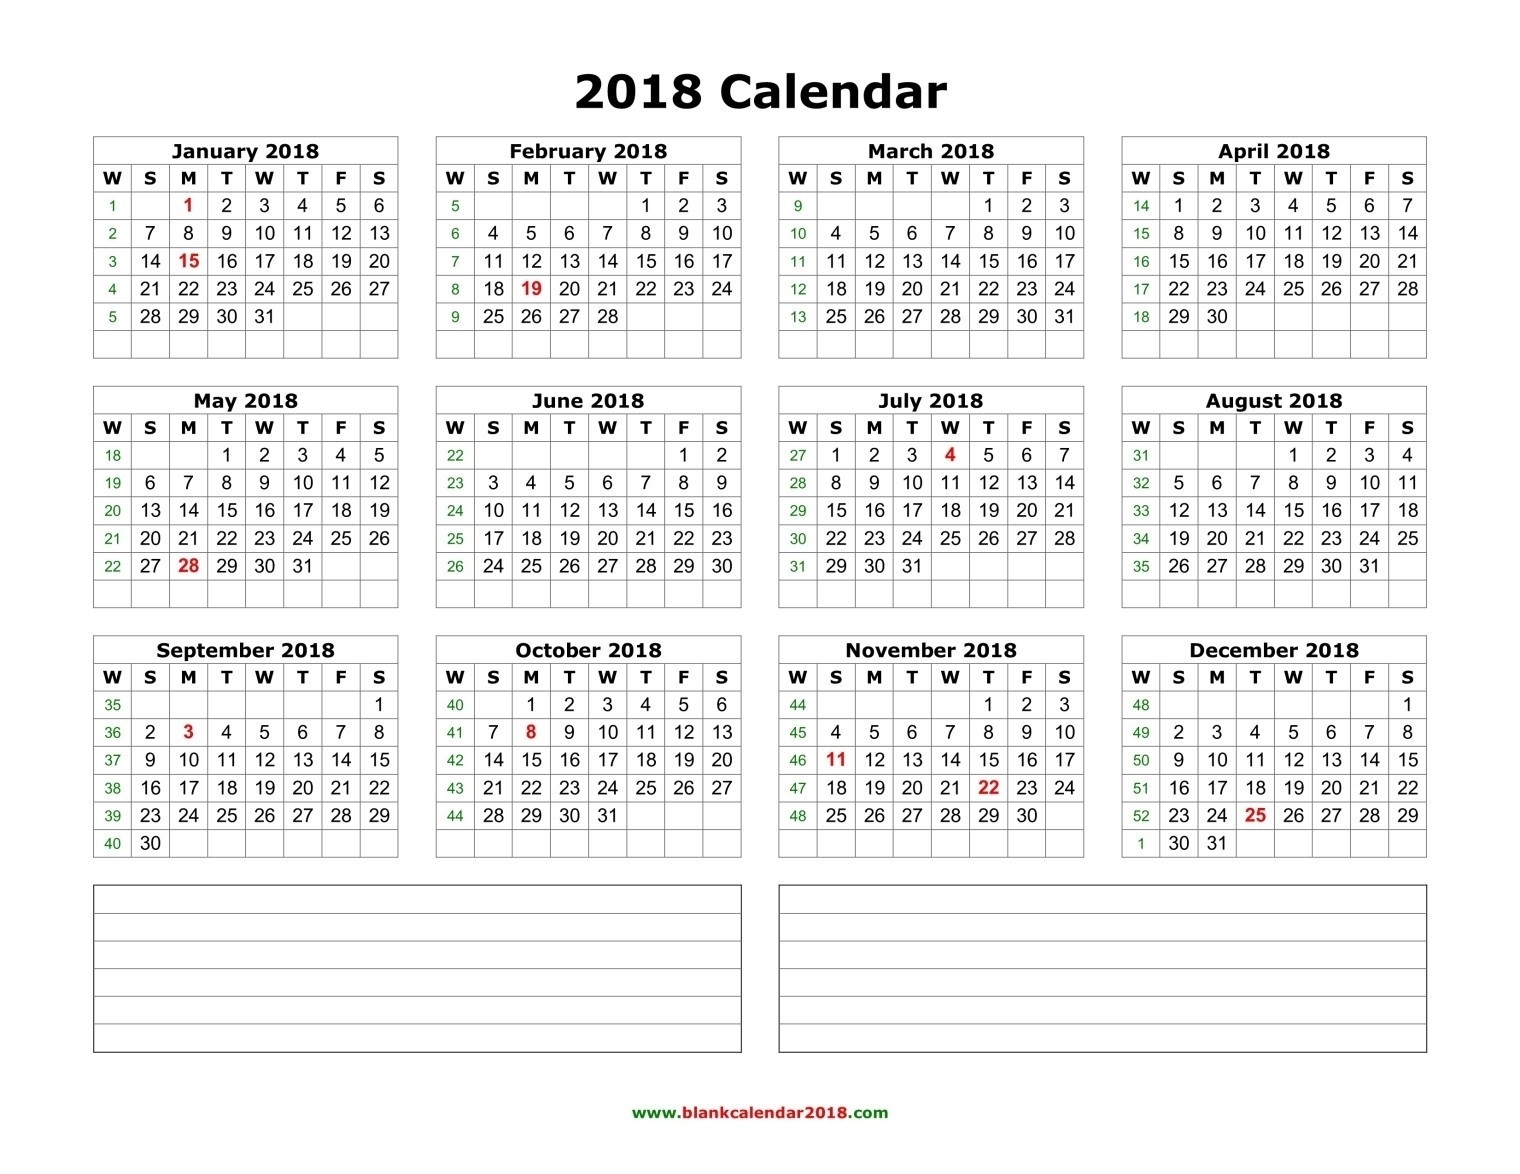 Blank Calendar 2018 Best Calendarlab 13 Calendarlab-2020 Calendar Labs Template